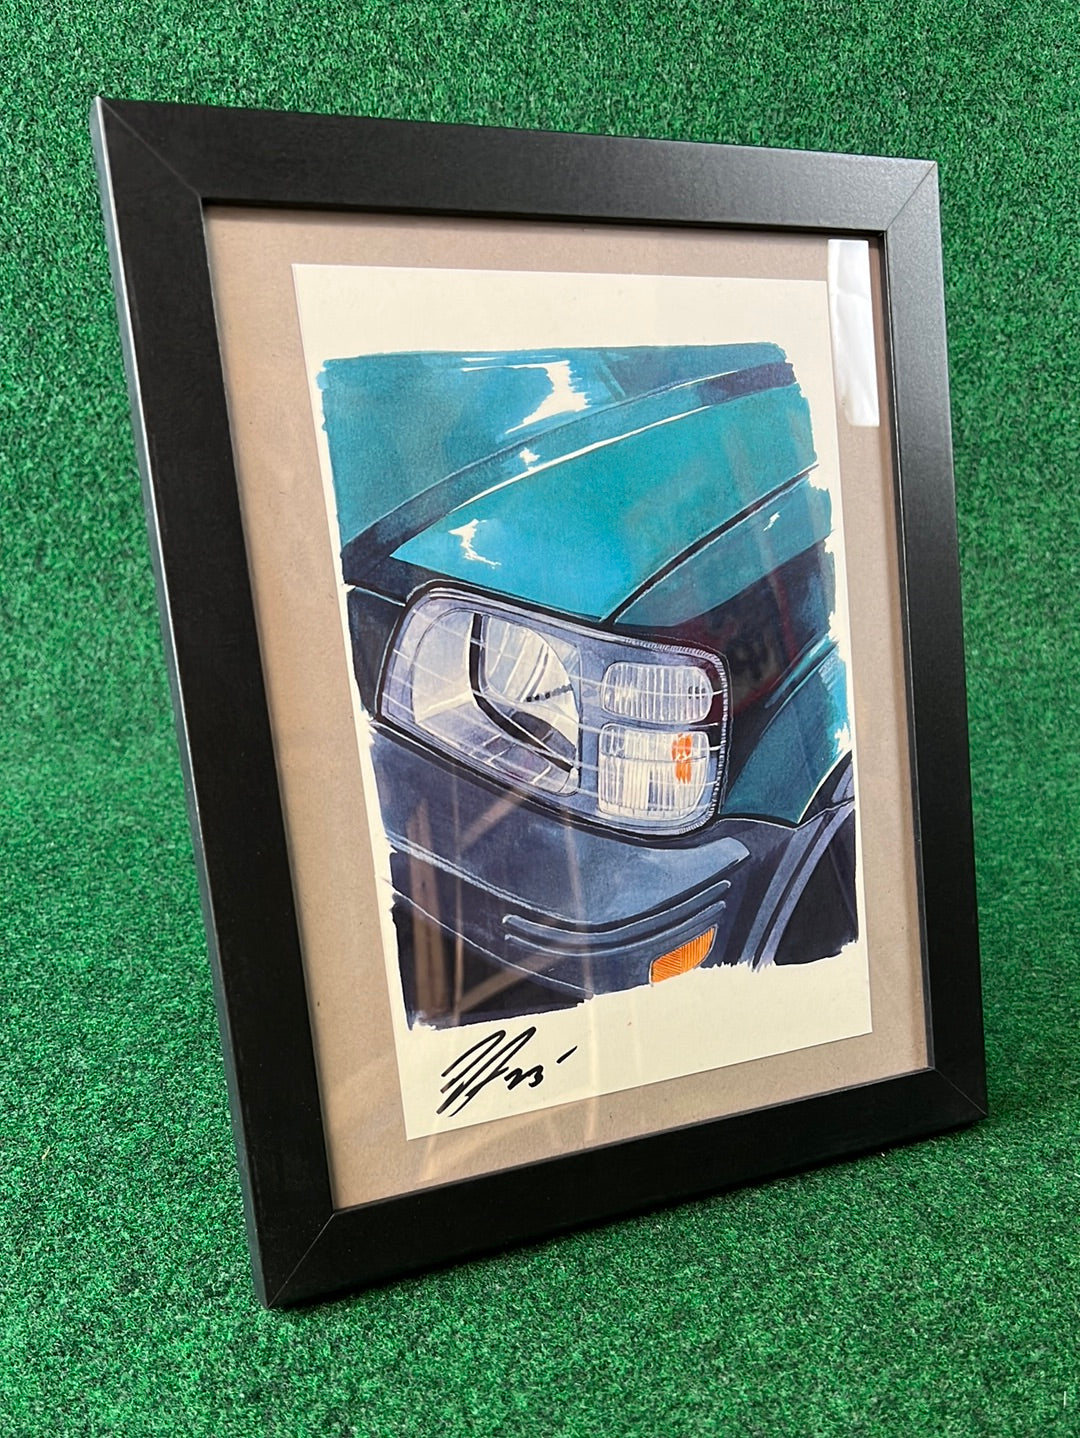 UNDERDOGZ - Honda CRV Front Left Headlight View Framed, Hand Drawn, Watercolor Painted & Signed Print